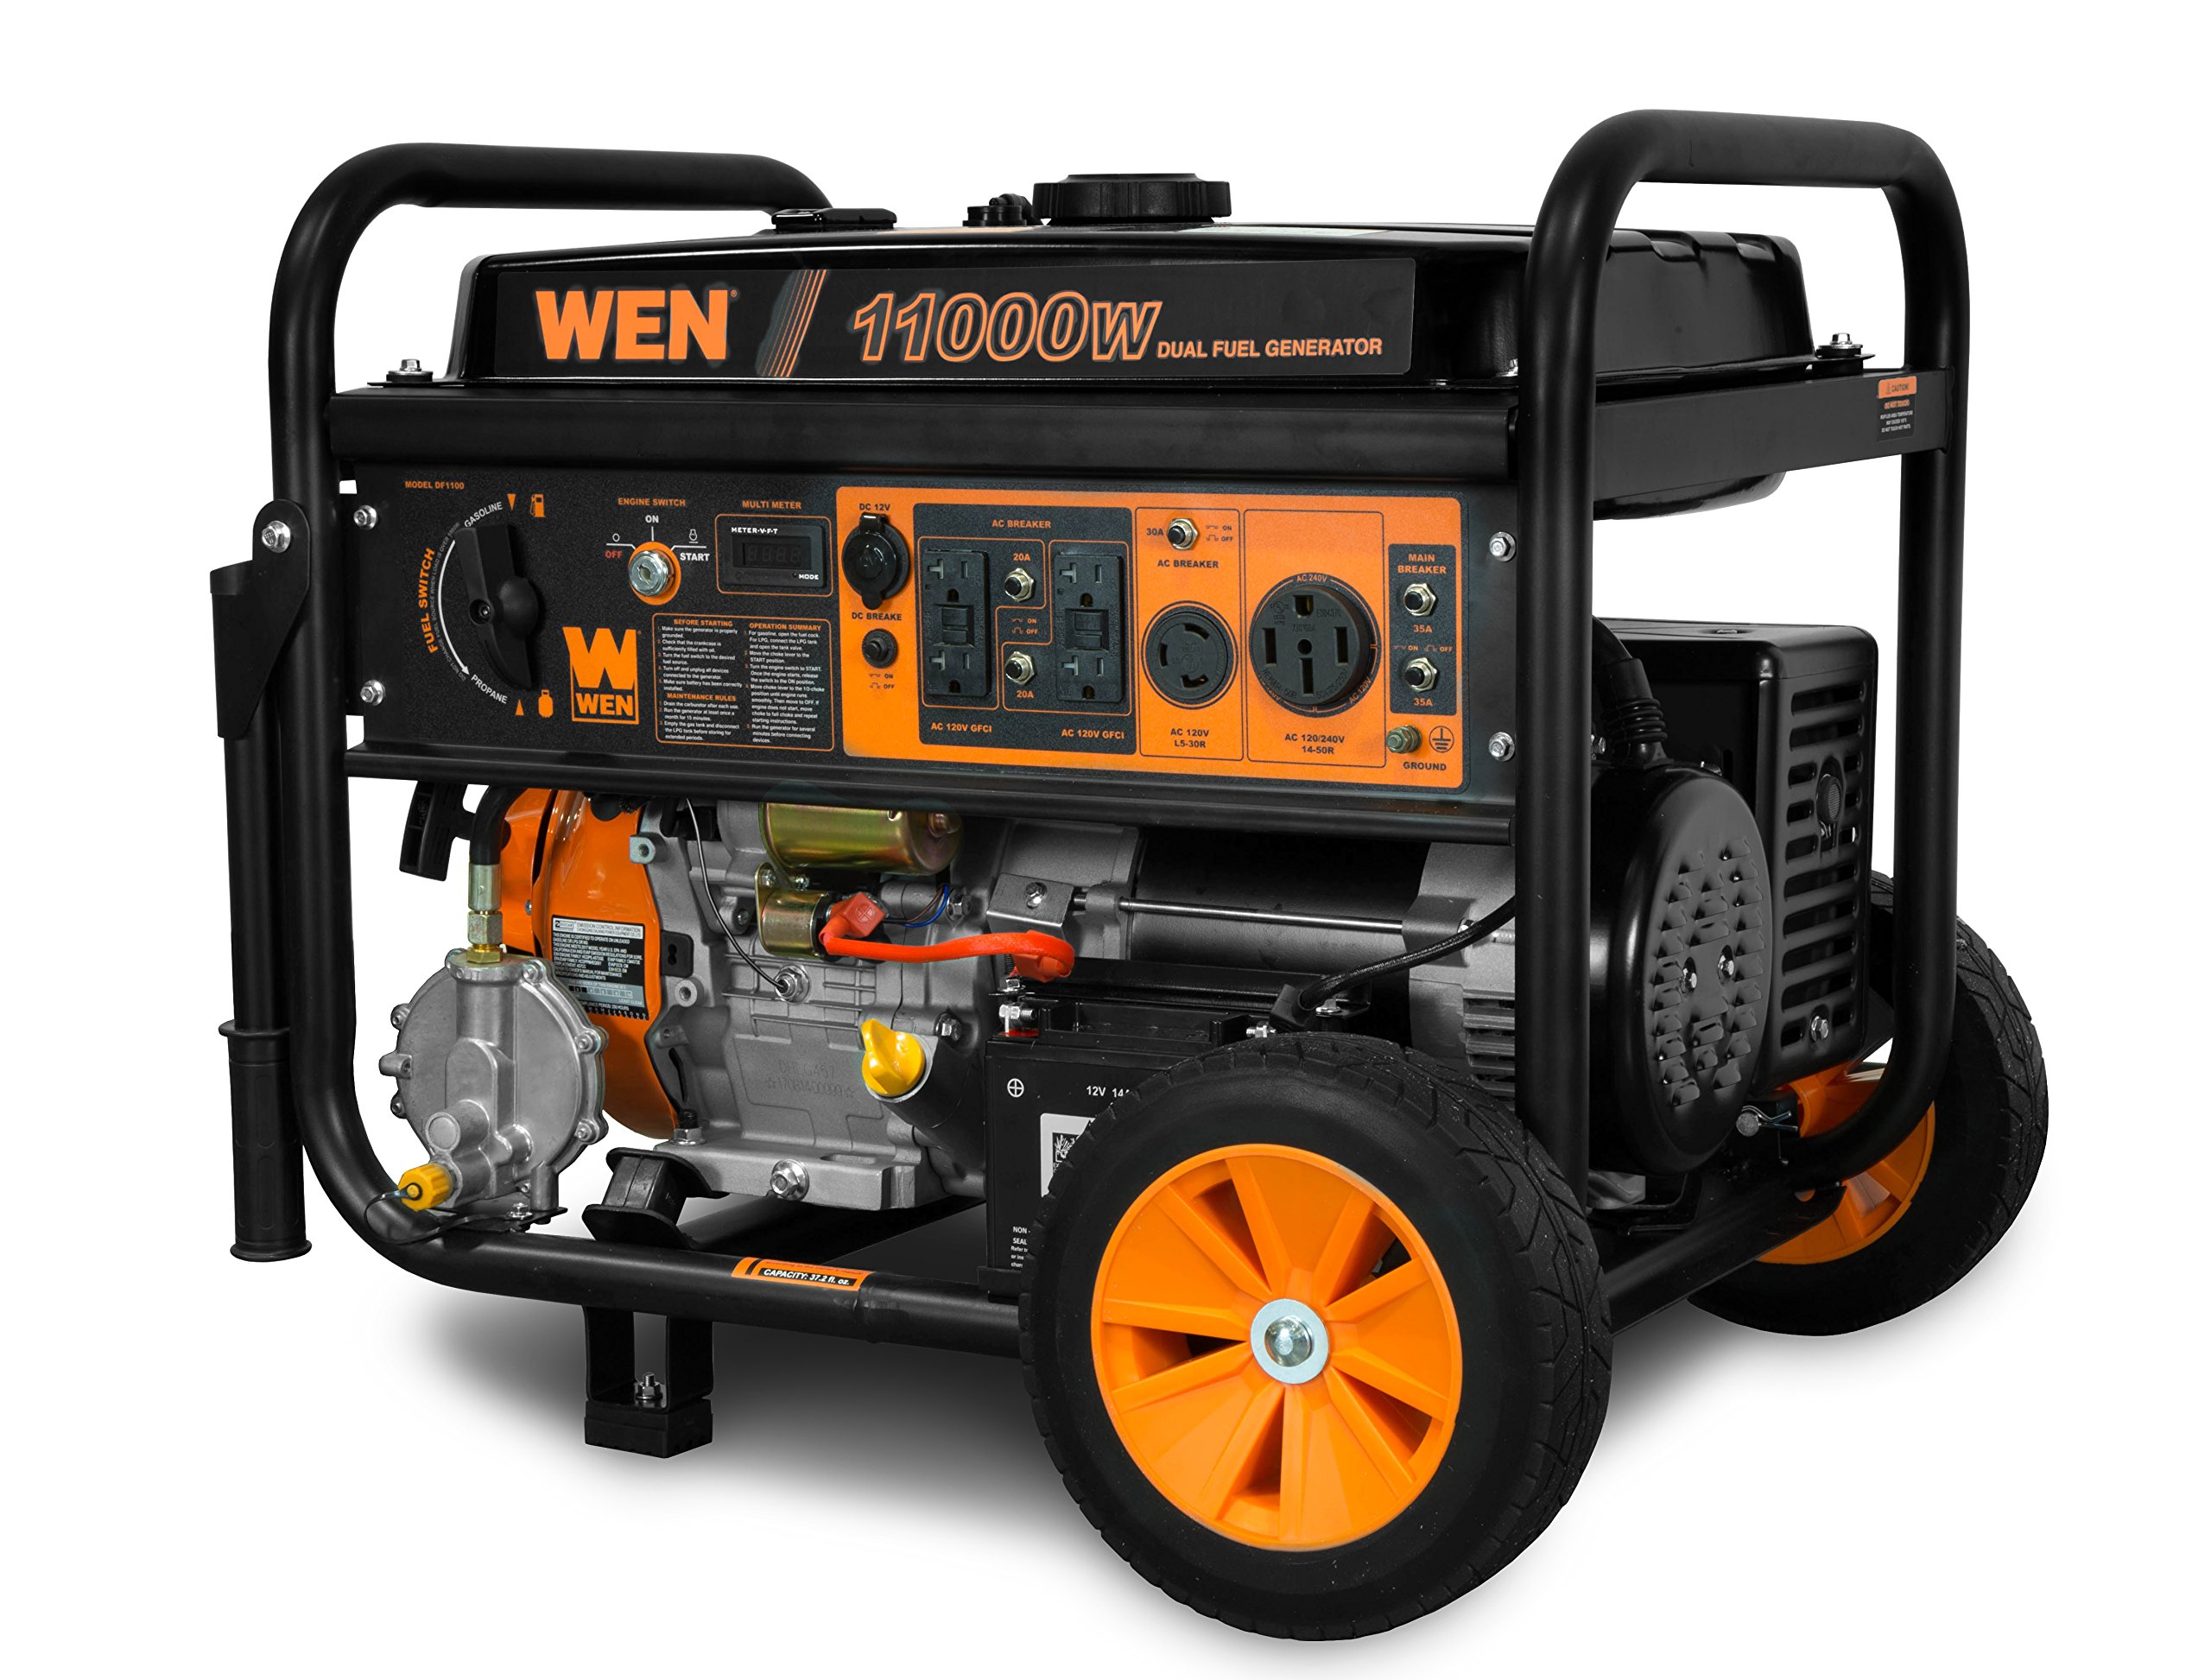 Amazon.com: WEN DF1100T 11,000-Watt 120V/240V Dual Fuel Portable Generator with Wheel Kit and Electric Start - CARB Compliant, Black : Everything Else $793.48